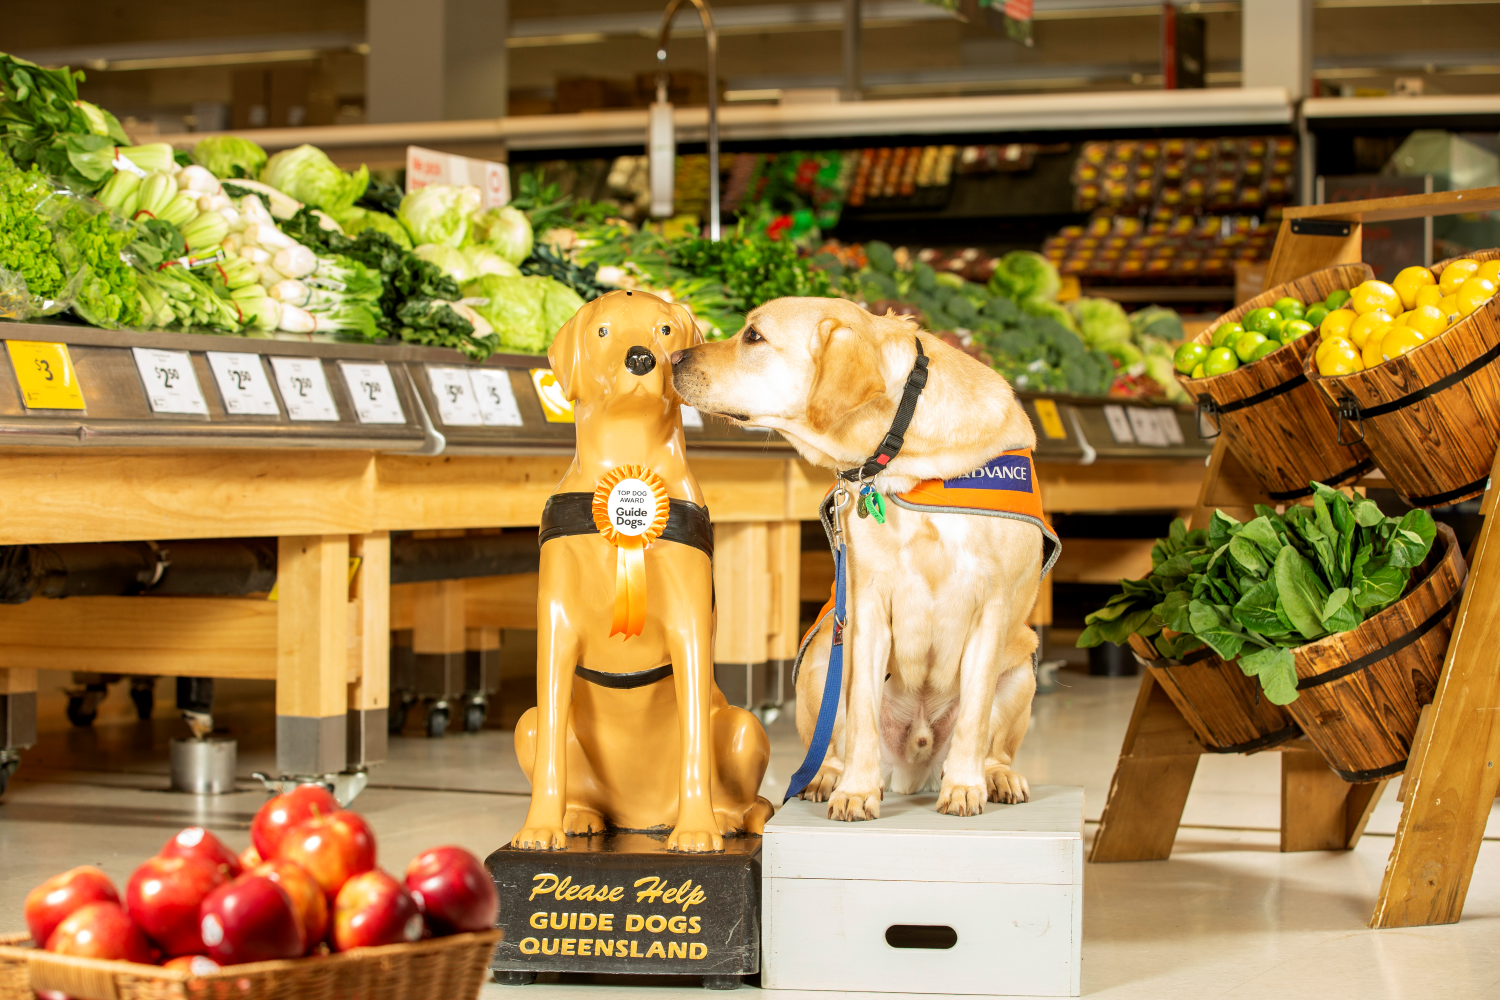 Guide Dogs Trainee Support Dog Yaden thanks one of Australia’s ‘Top Dogs’ at Coles Miami, Queensland